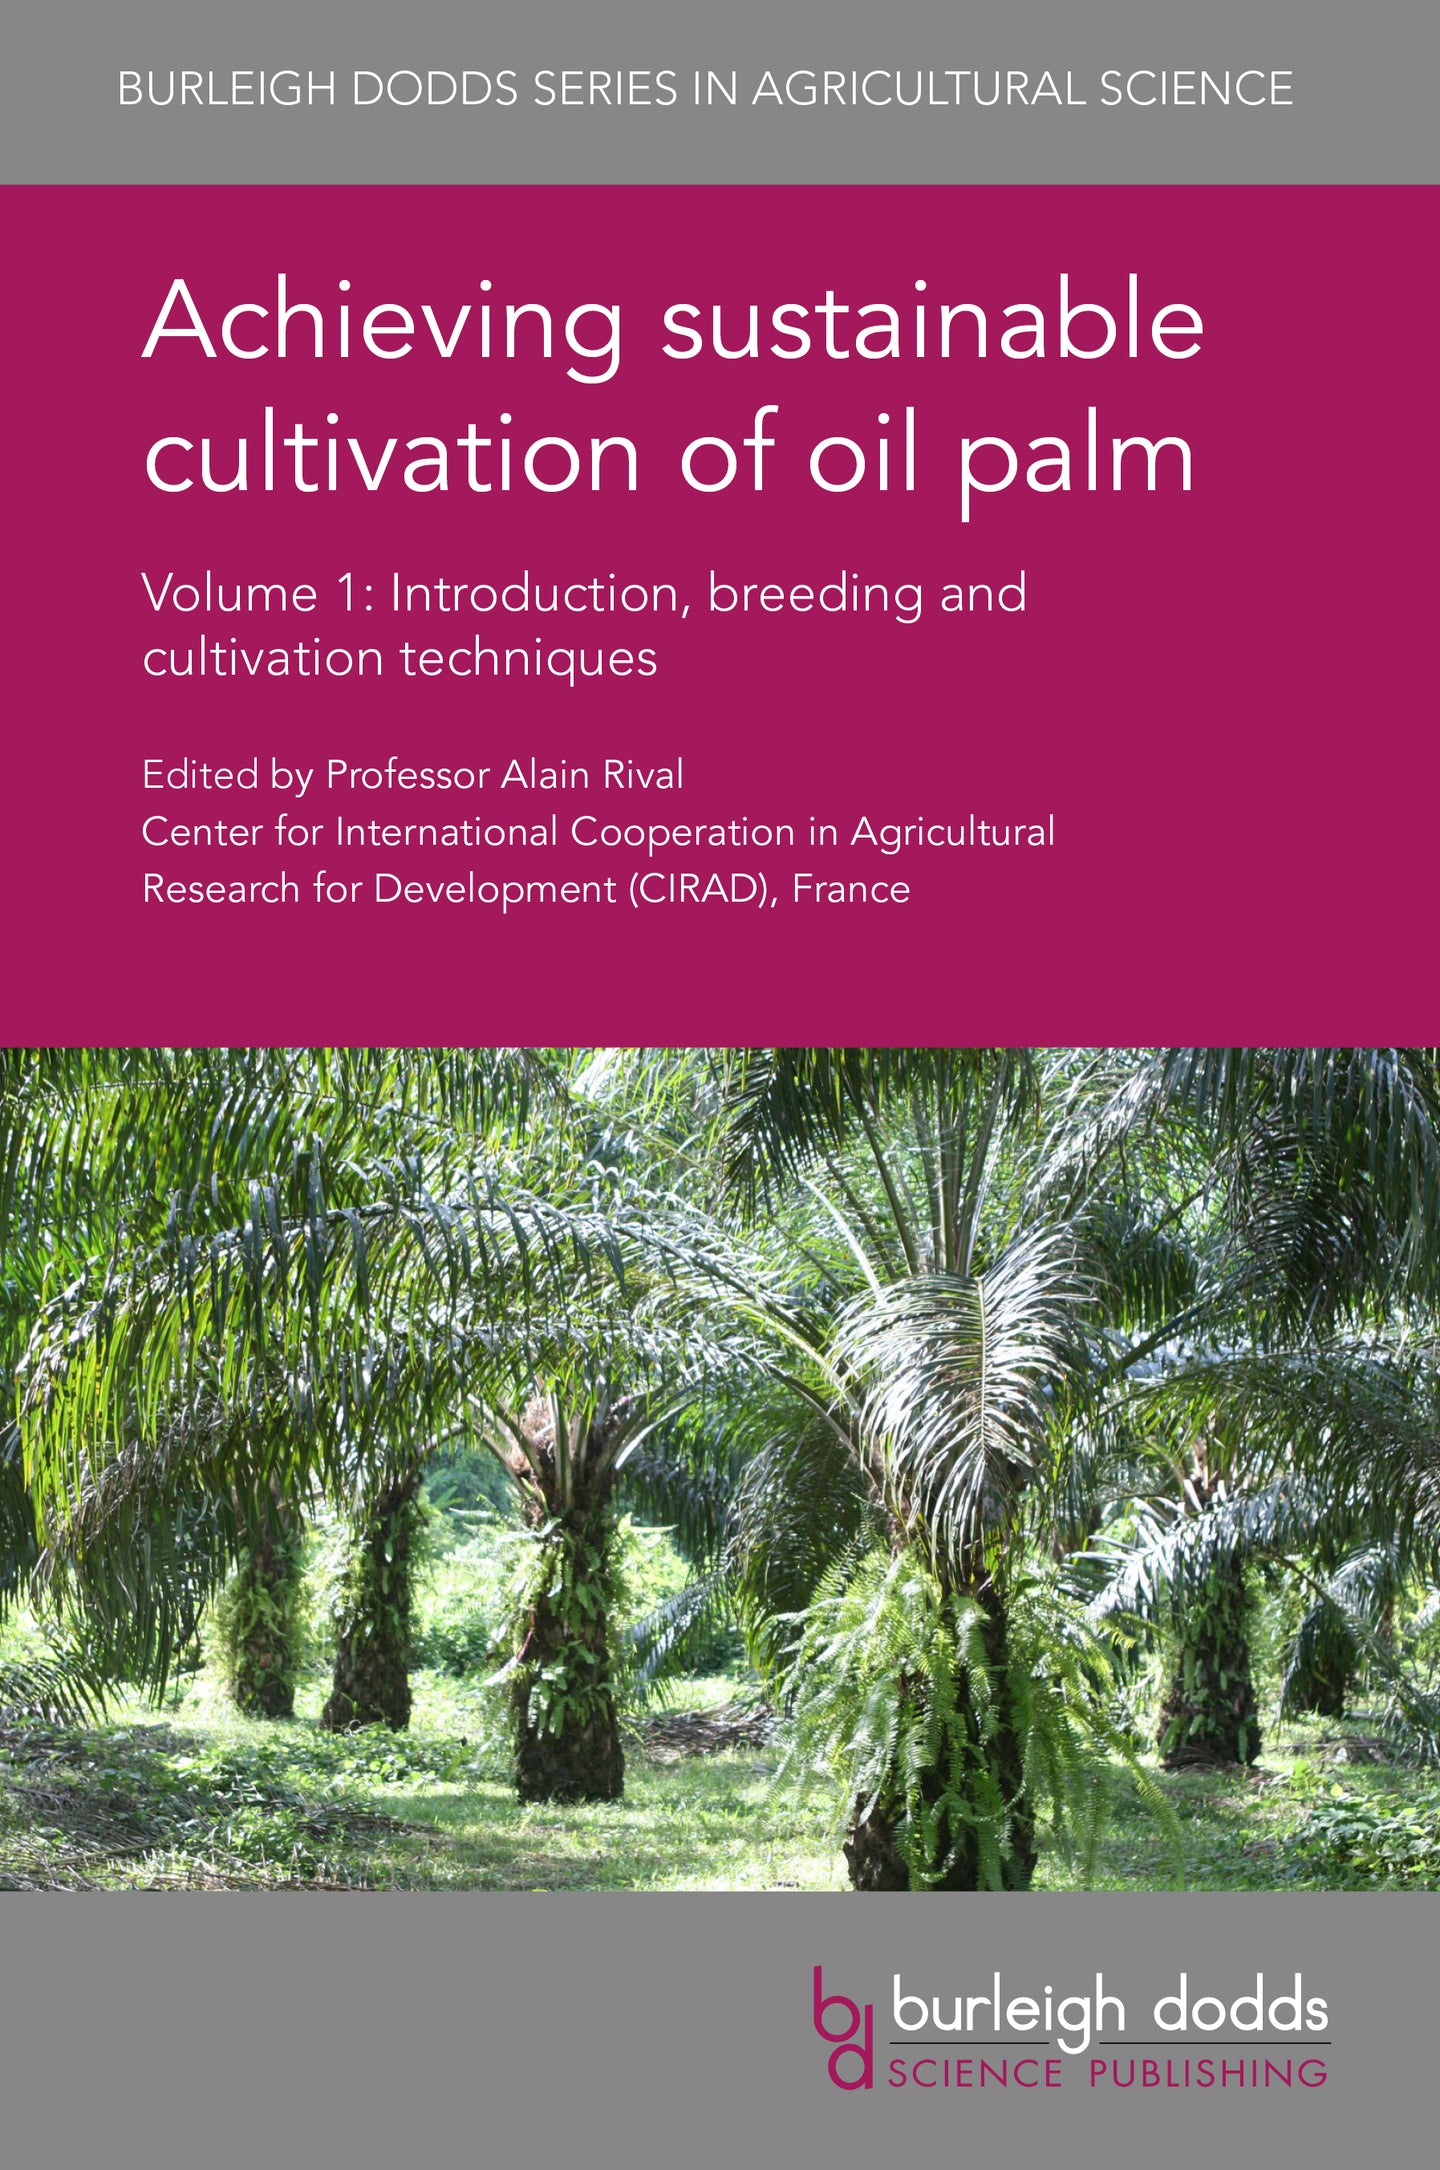 x Achieving sustainable cultivation of oil palm. Volume 1